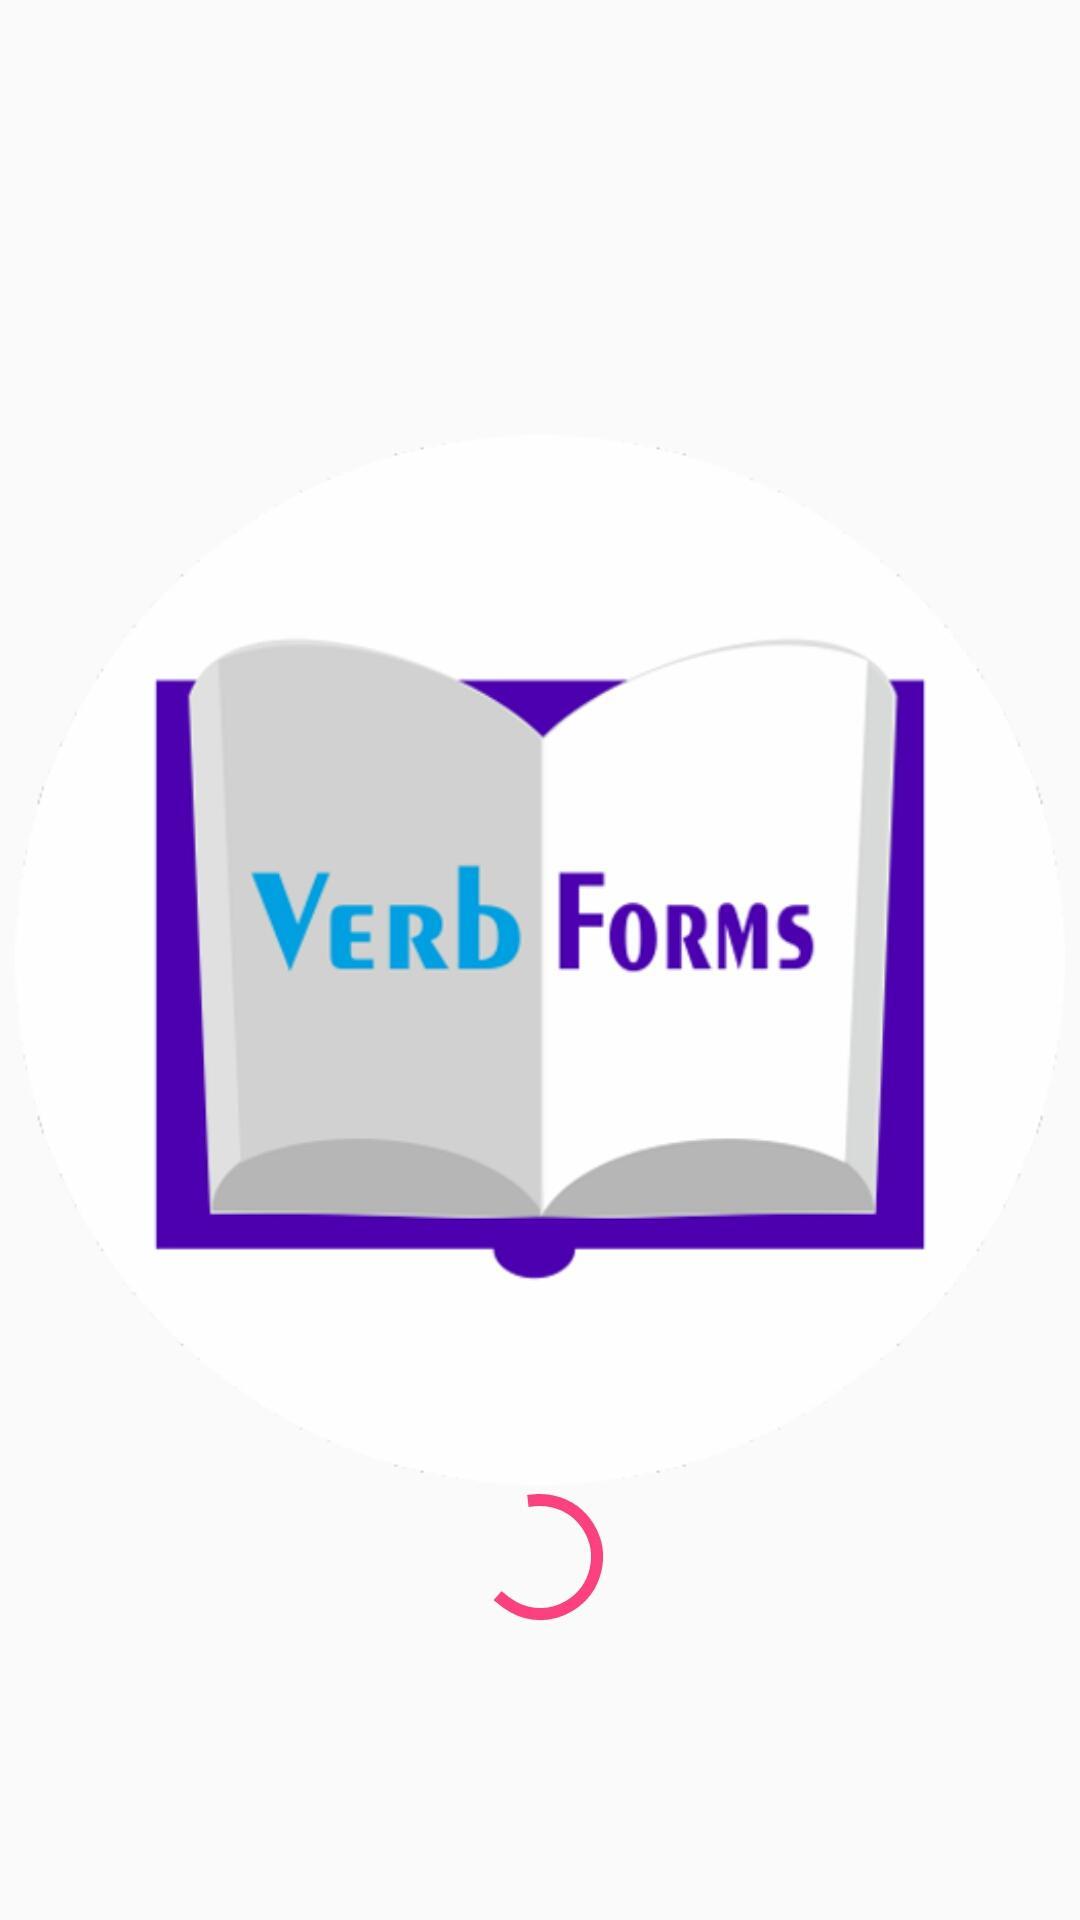 Download forms. Verb forms.